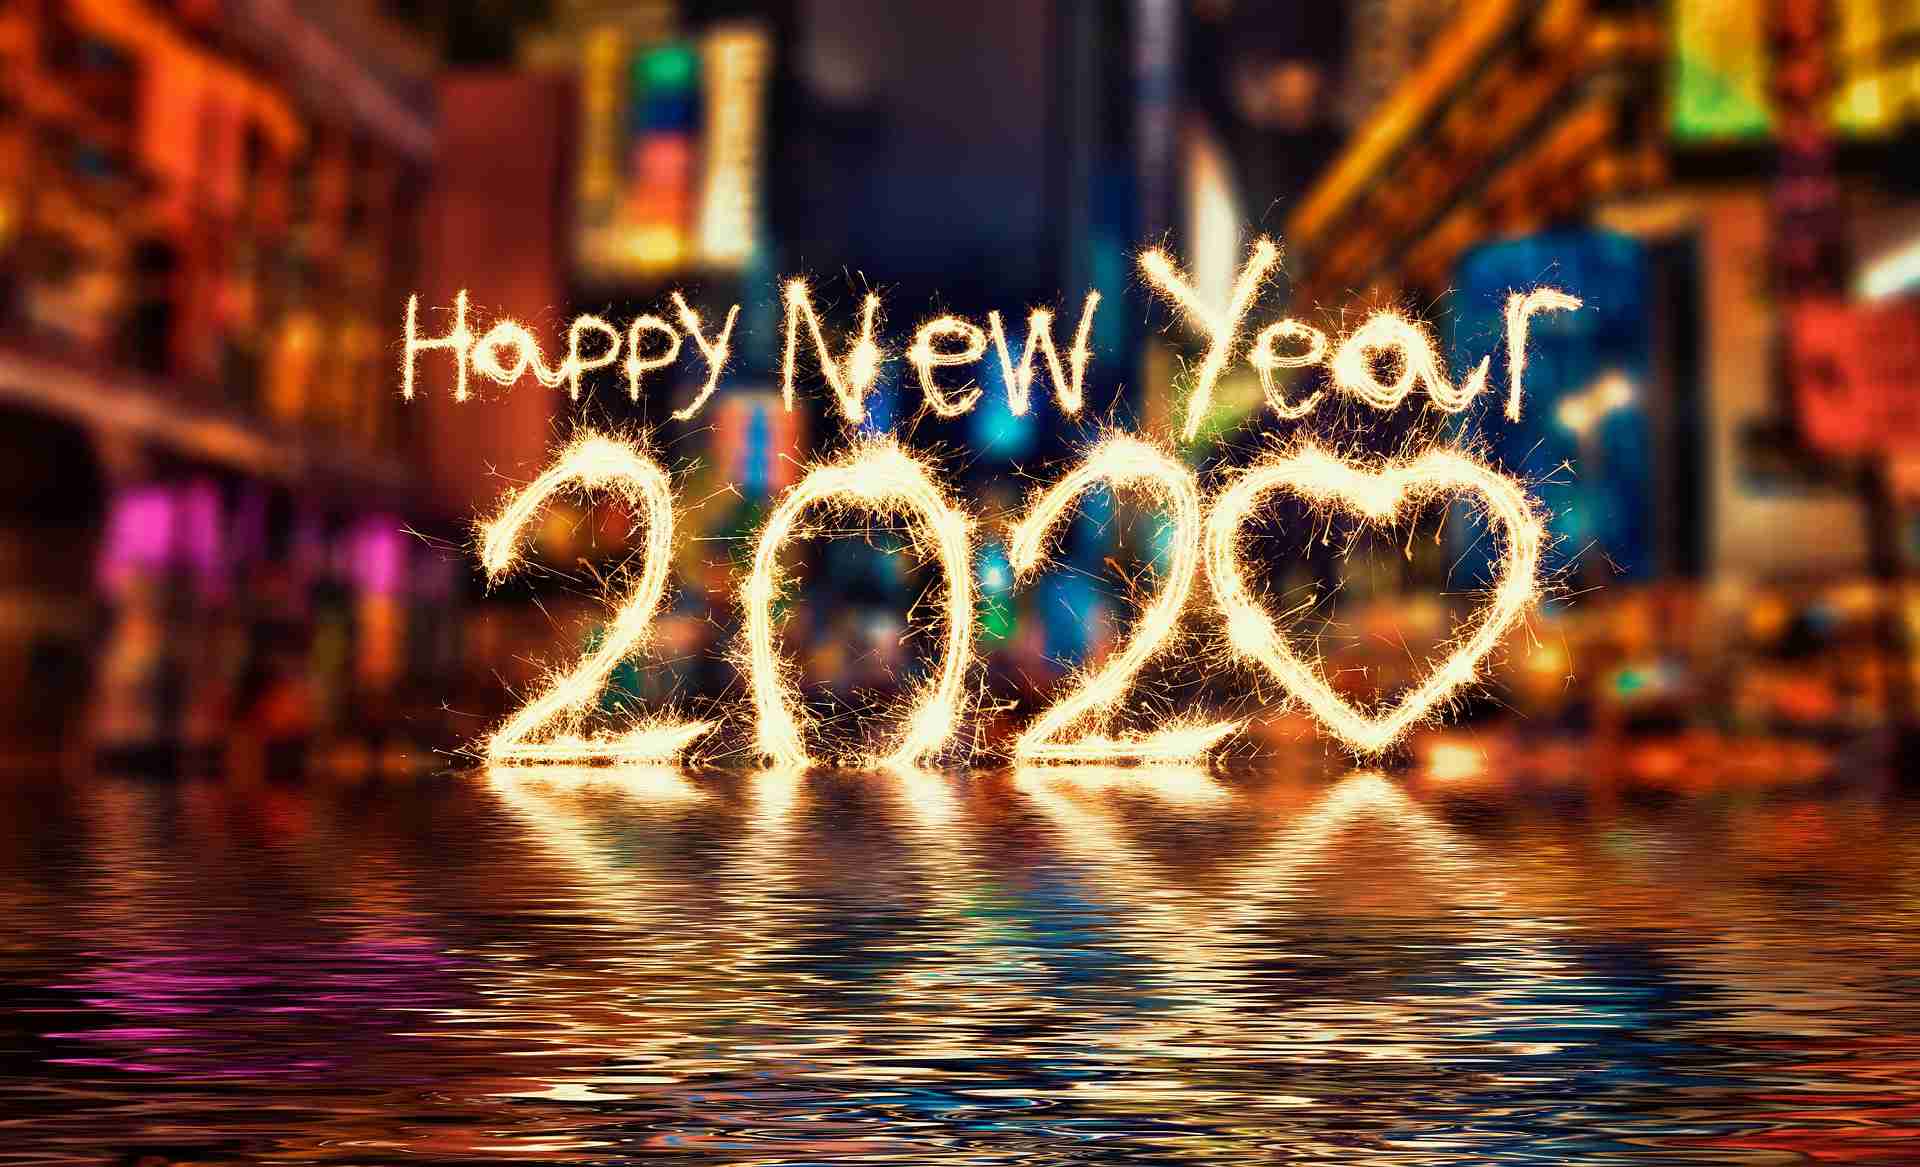 jj locksmiths lewisham blog january 2020 Happy New year to all of our customers